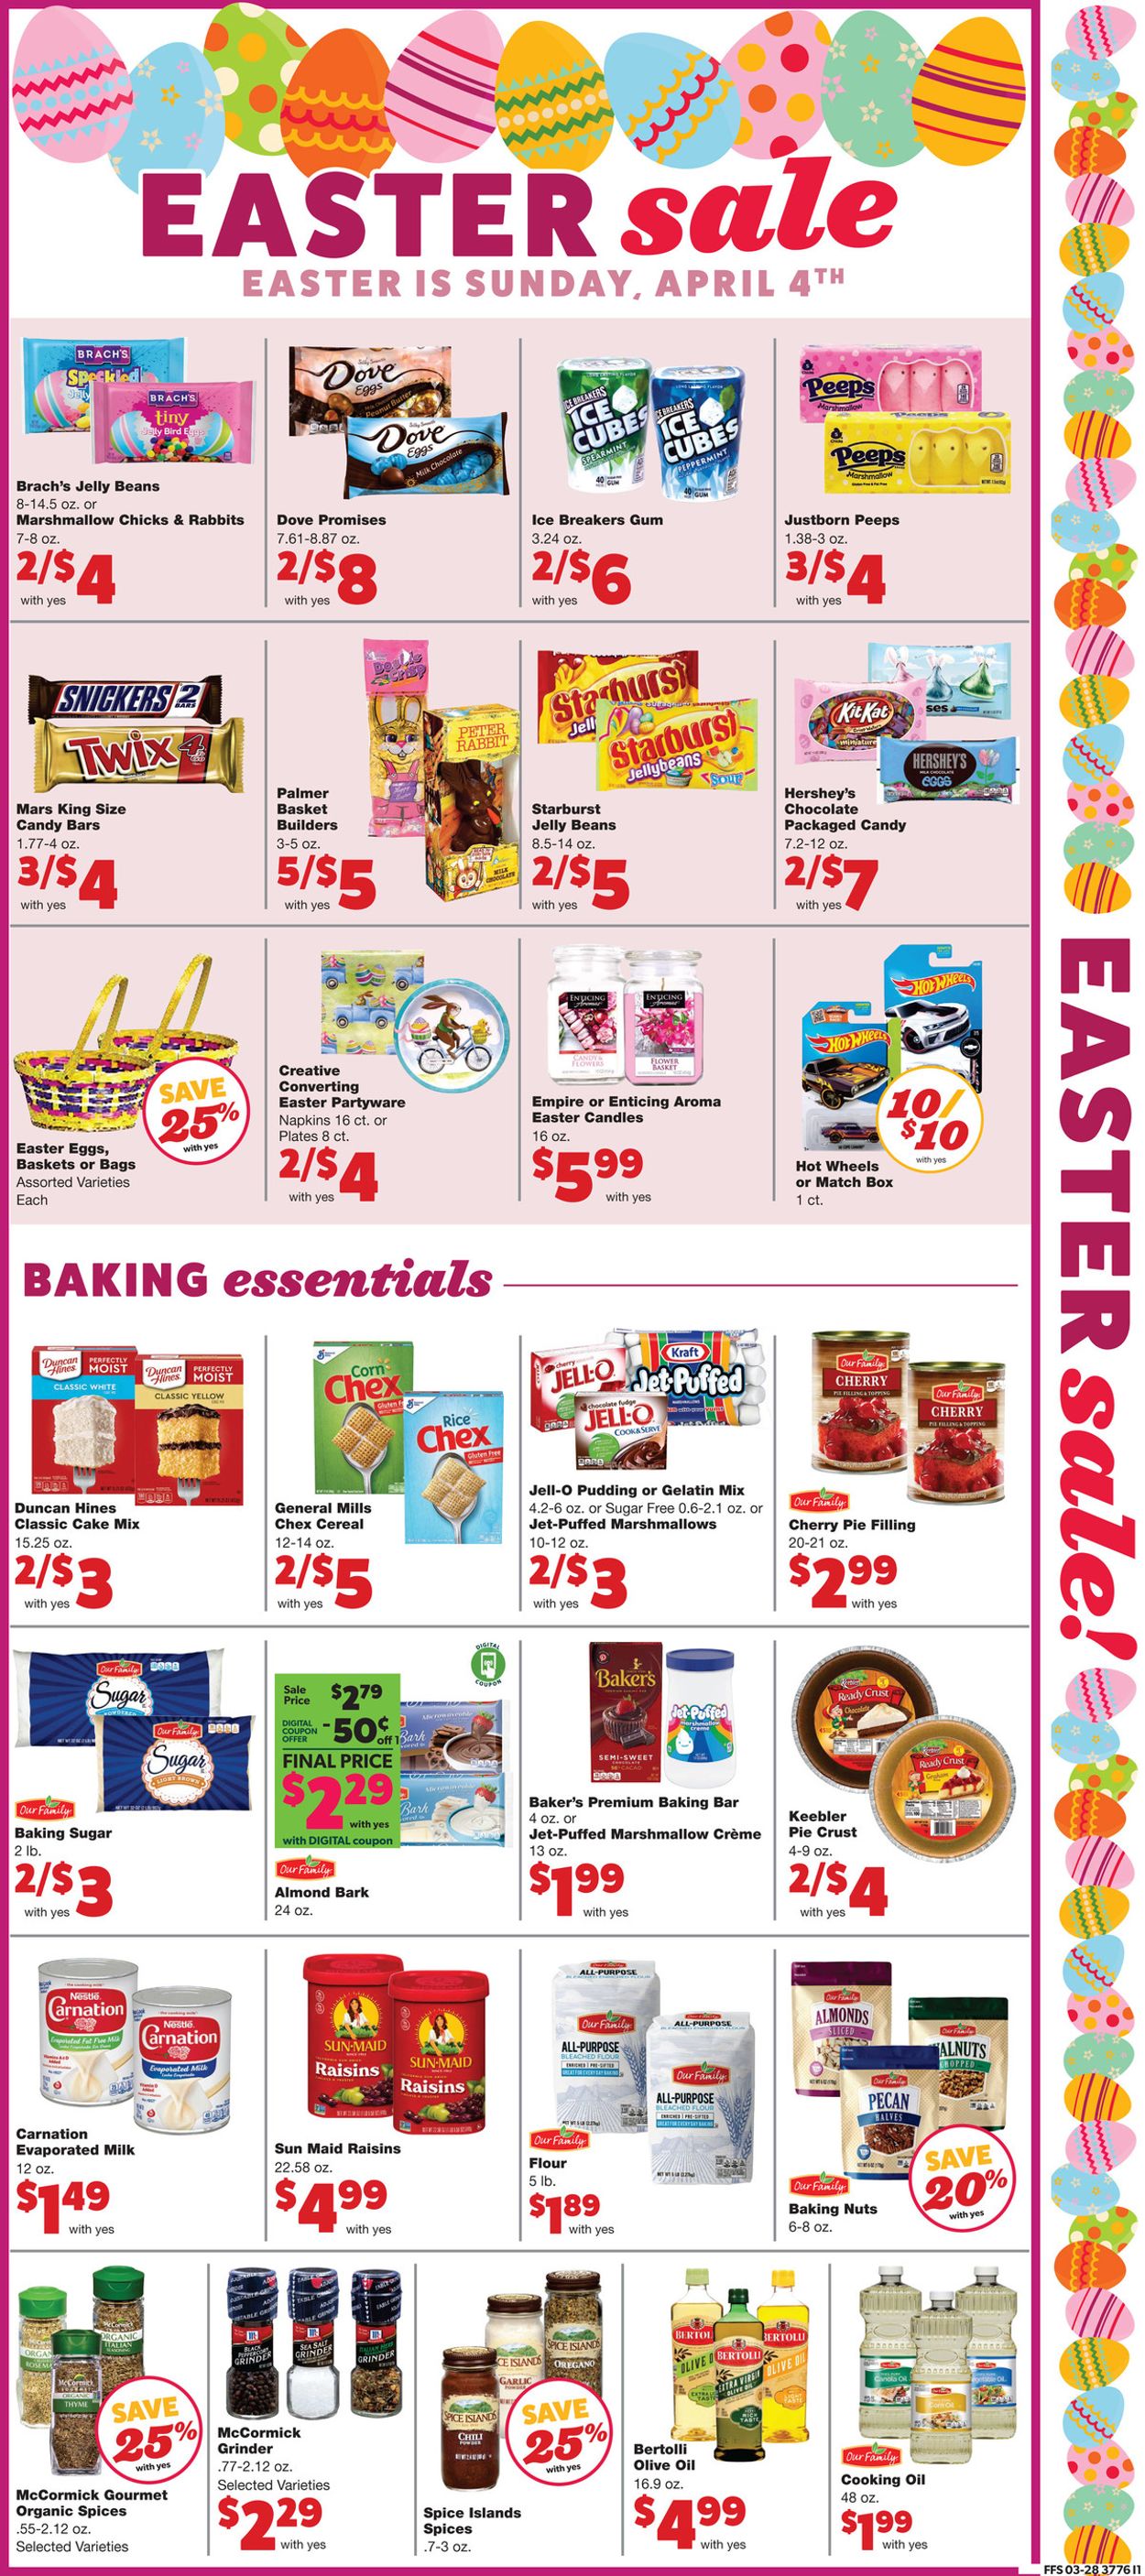 Family Fare - Easter 2021 ad Weekly Ad Circular - valid 03/31-04/06/2021 (Page 6)